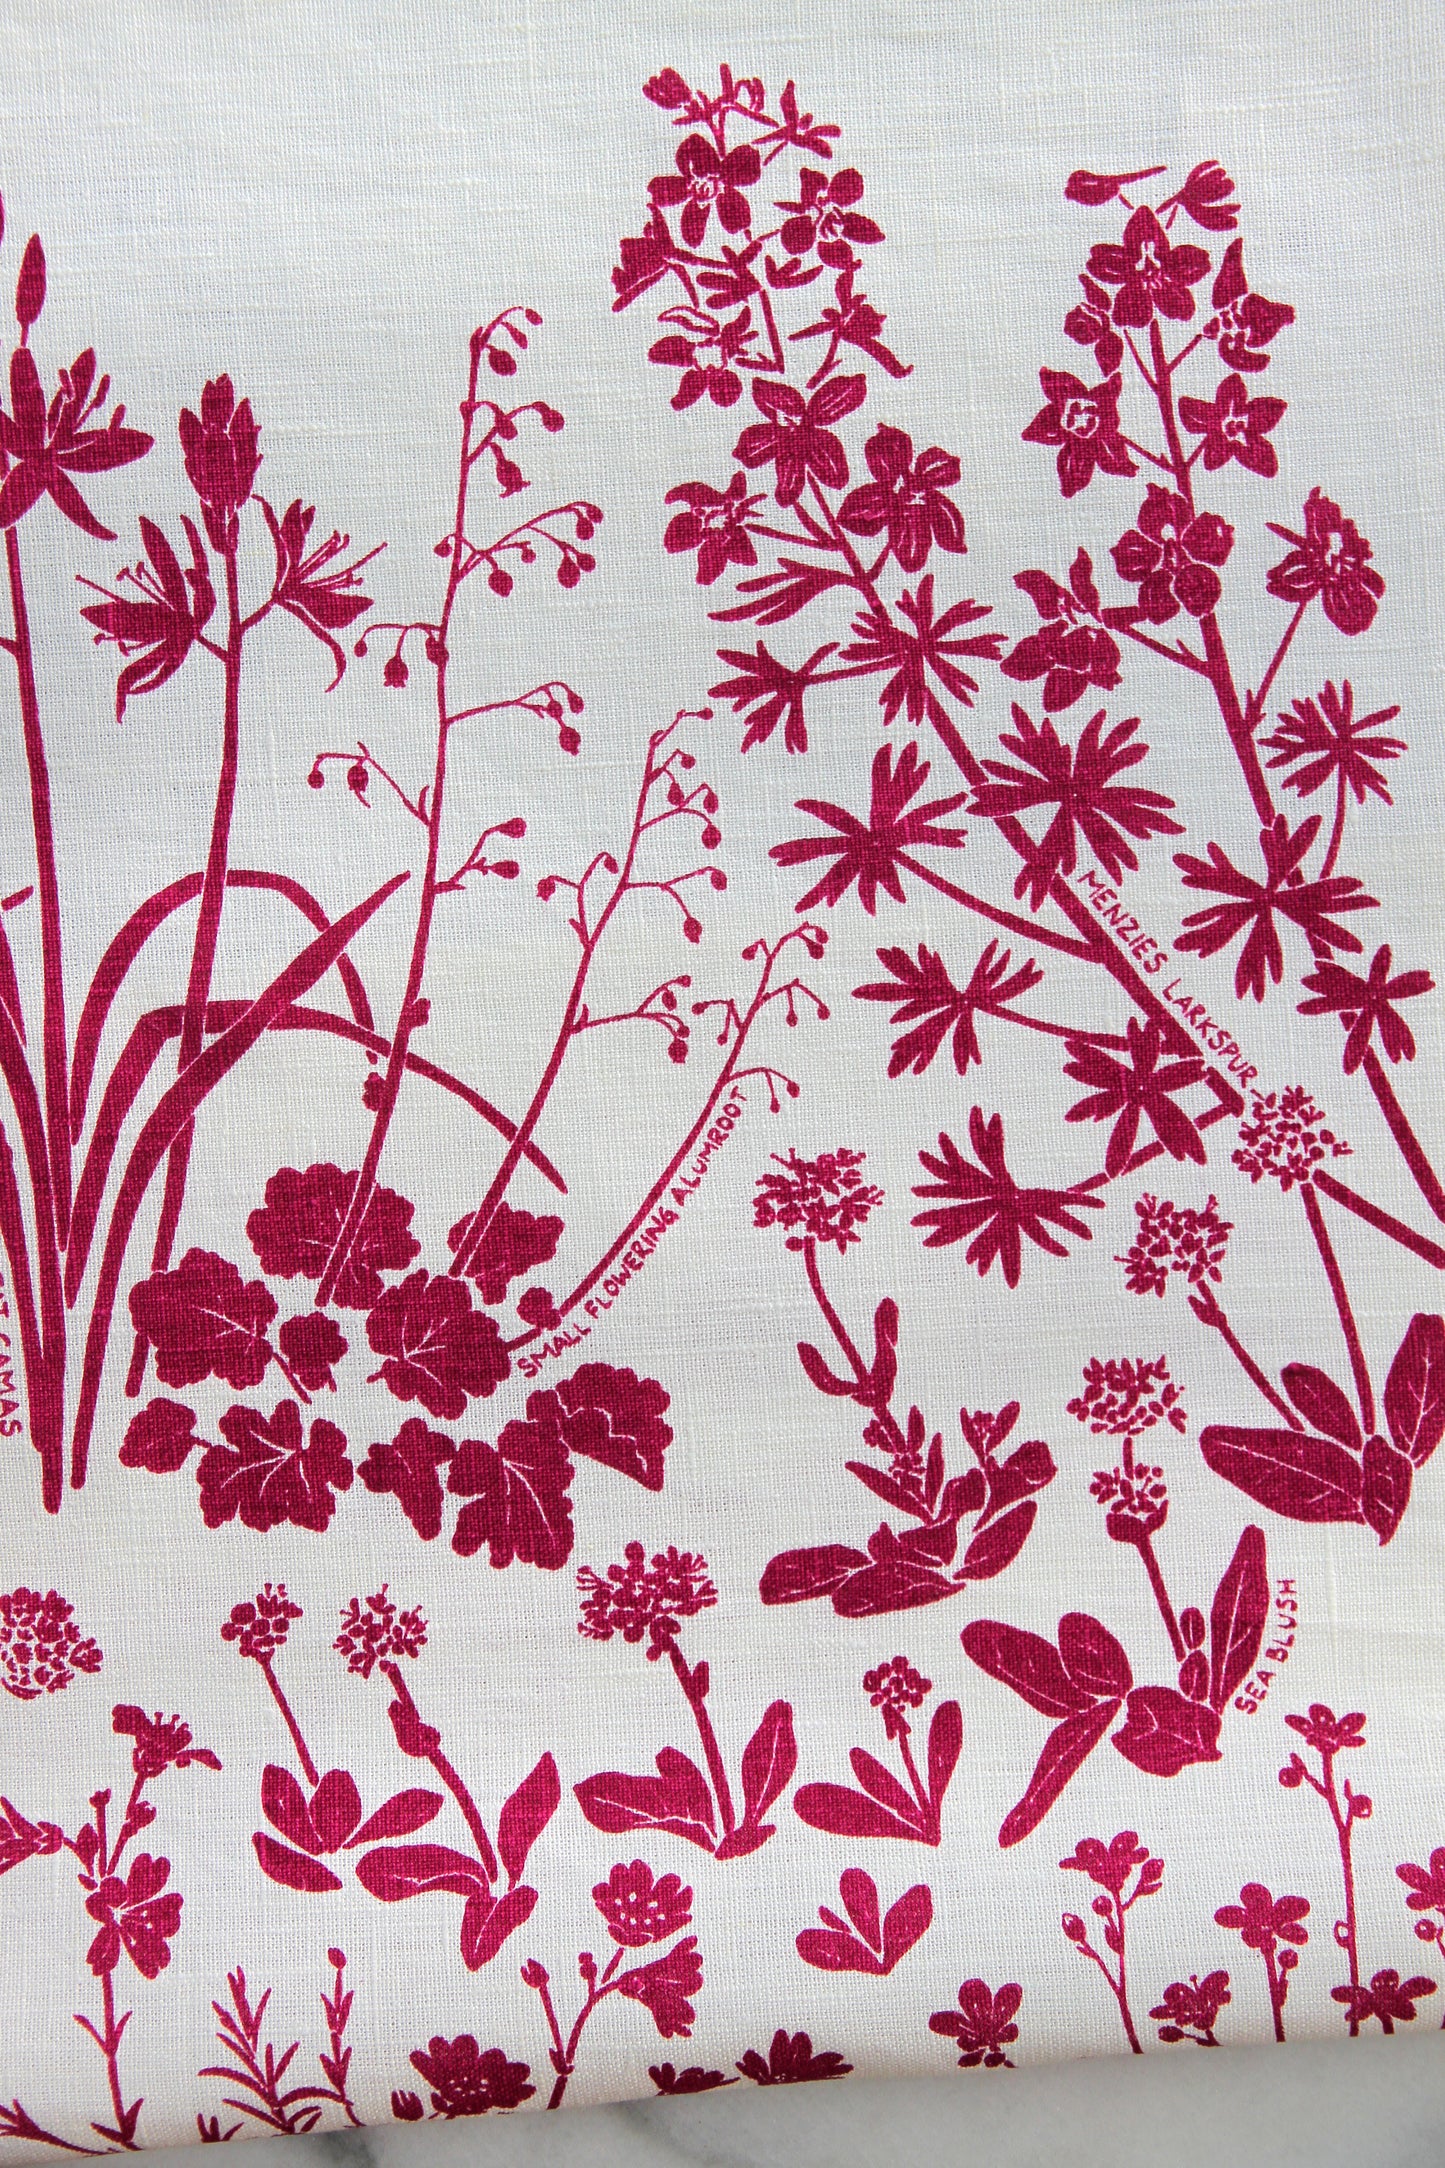 Rocky Outcropping Wildflowers in Plum Jam on White Linen